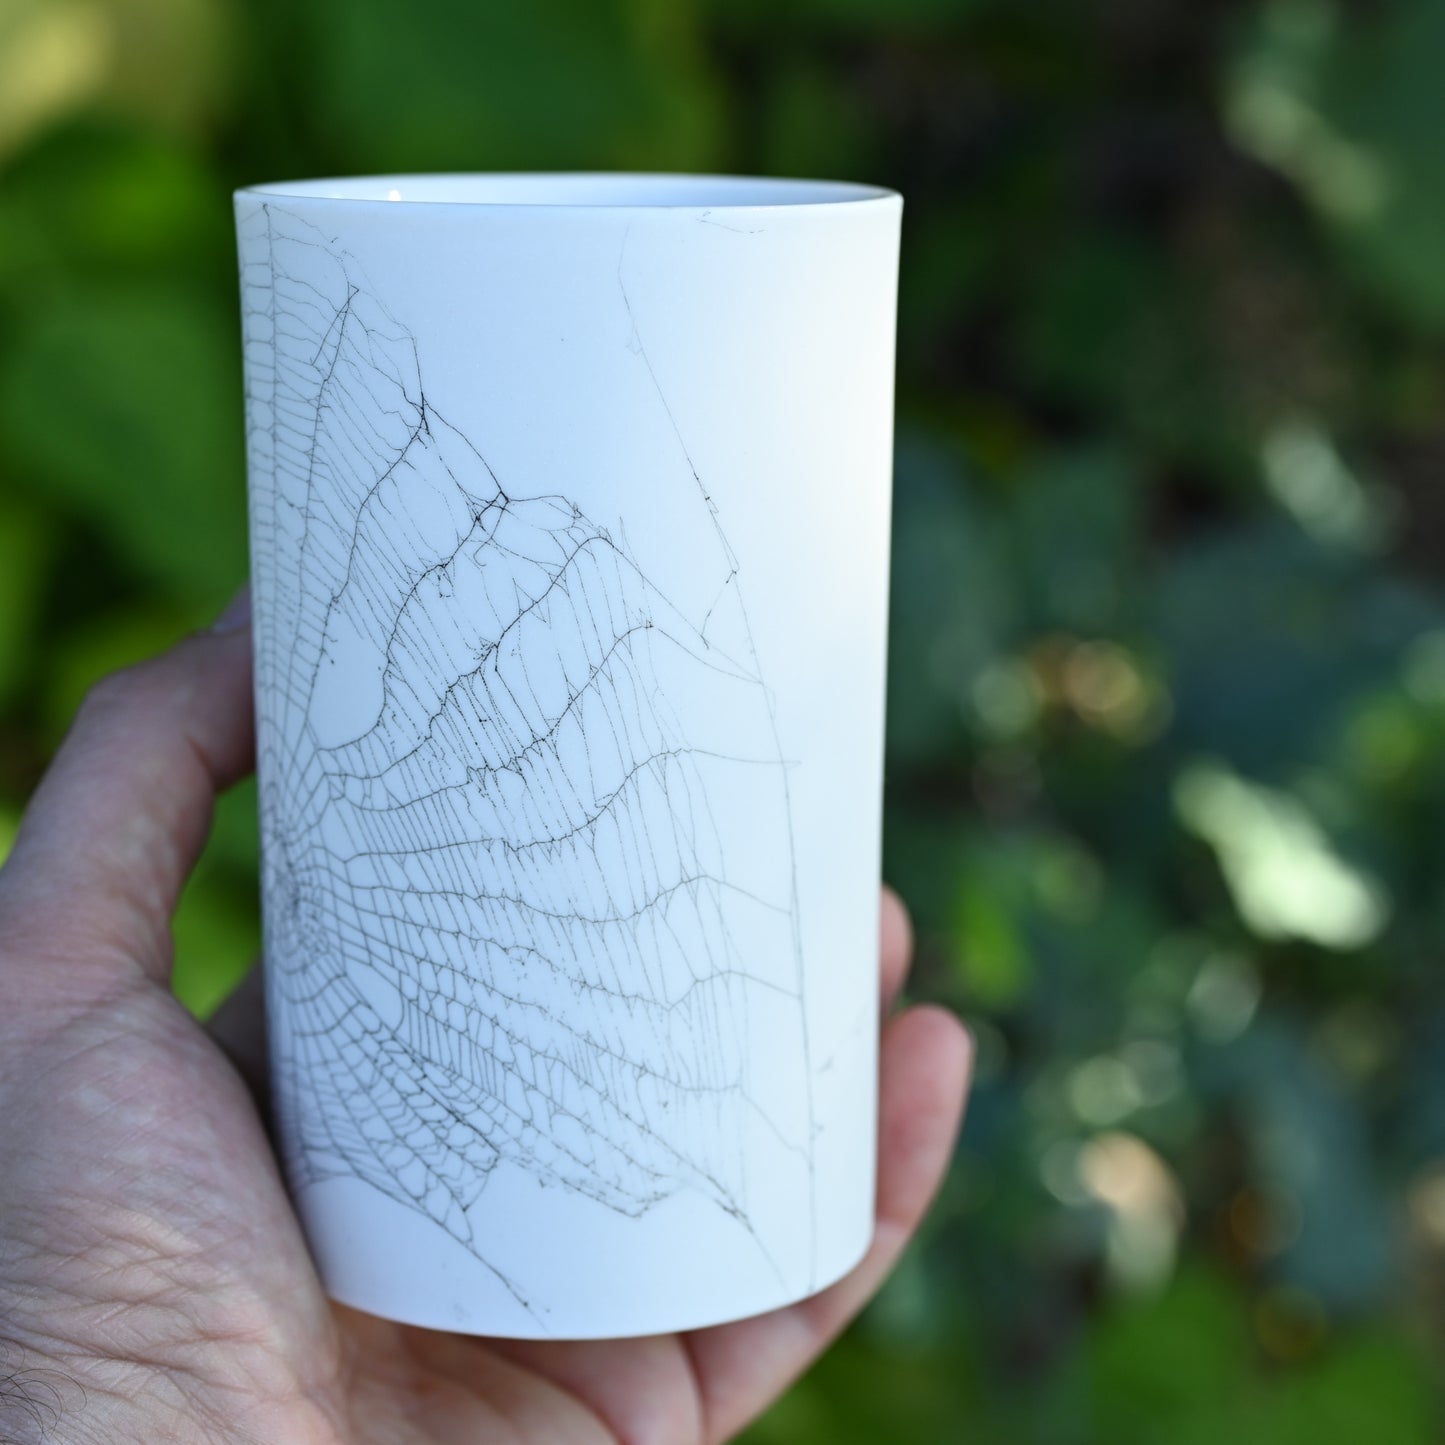 Web on Clay (118), Collected September 09, 2022